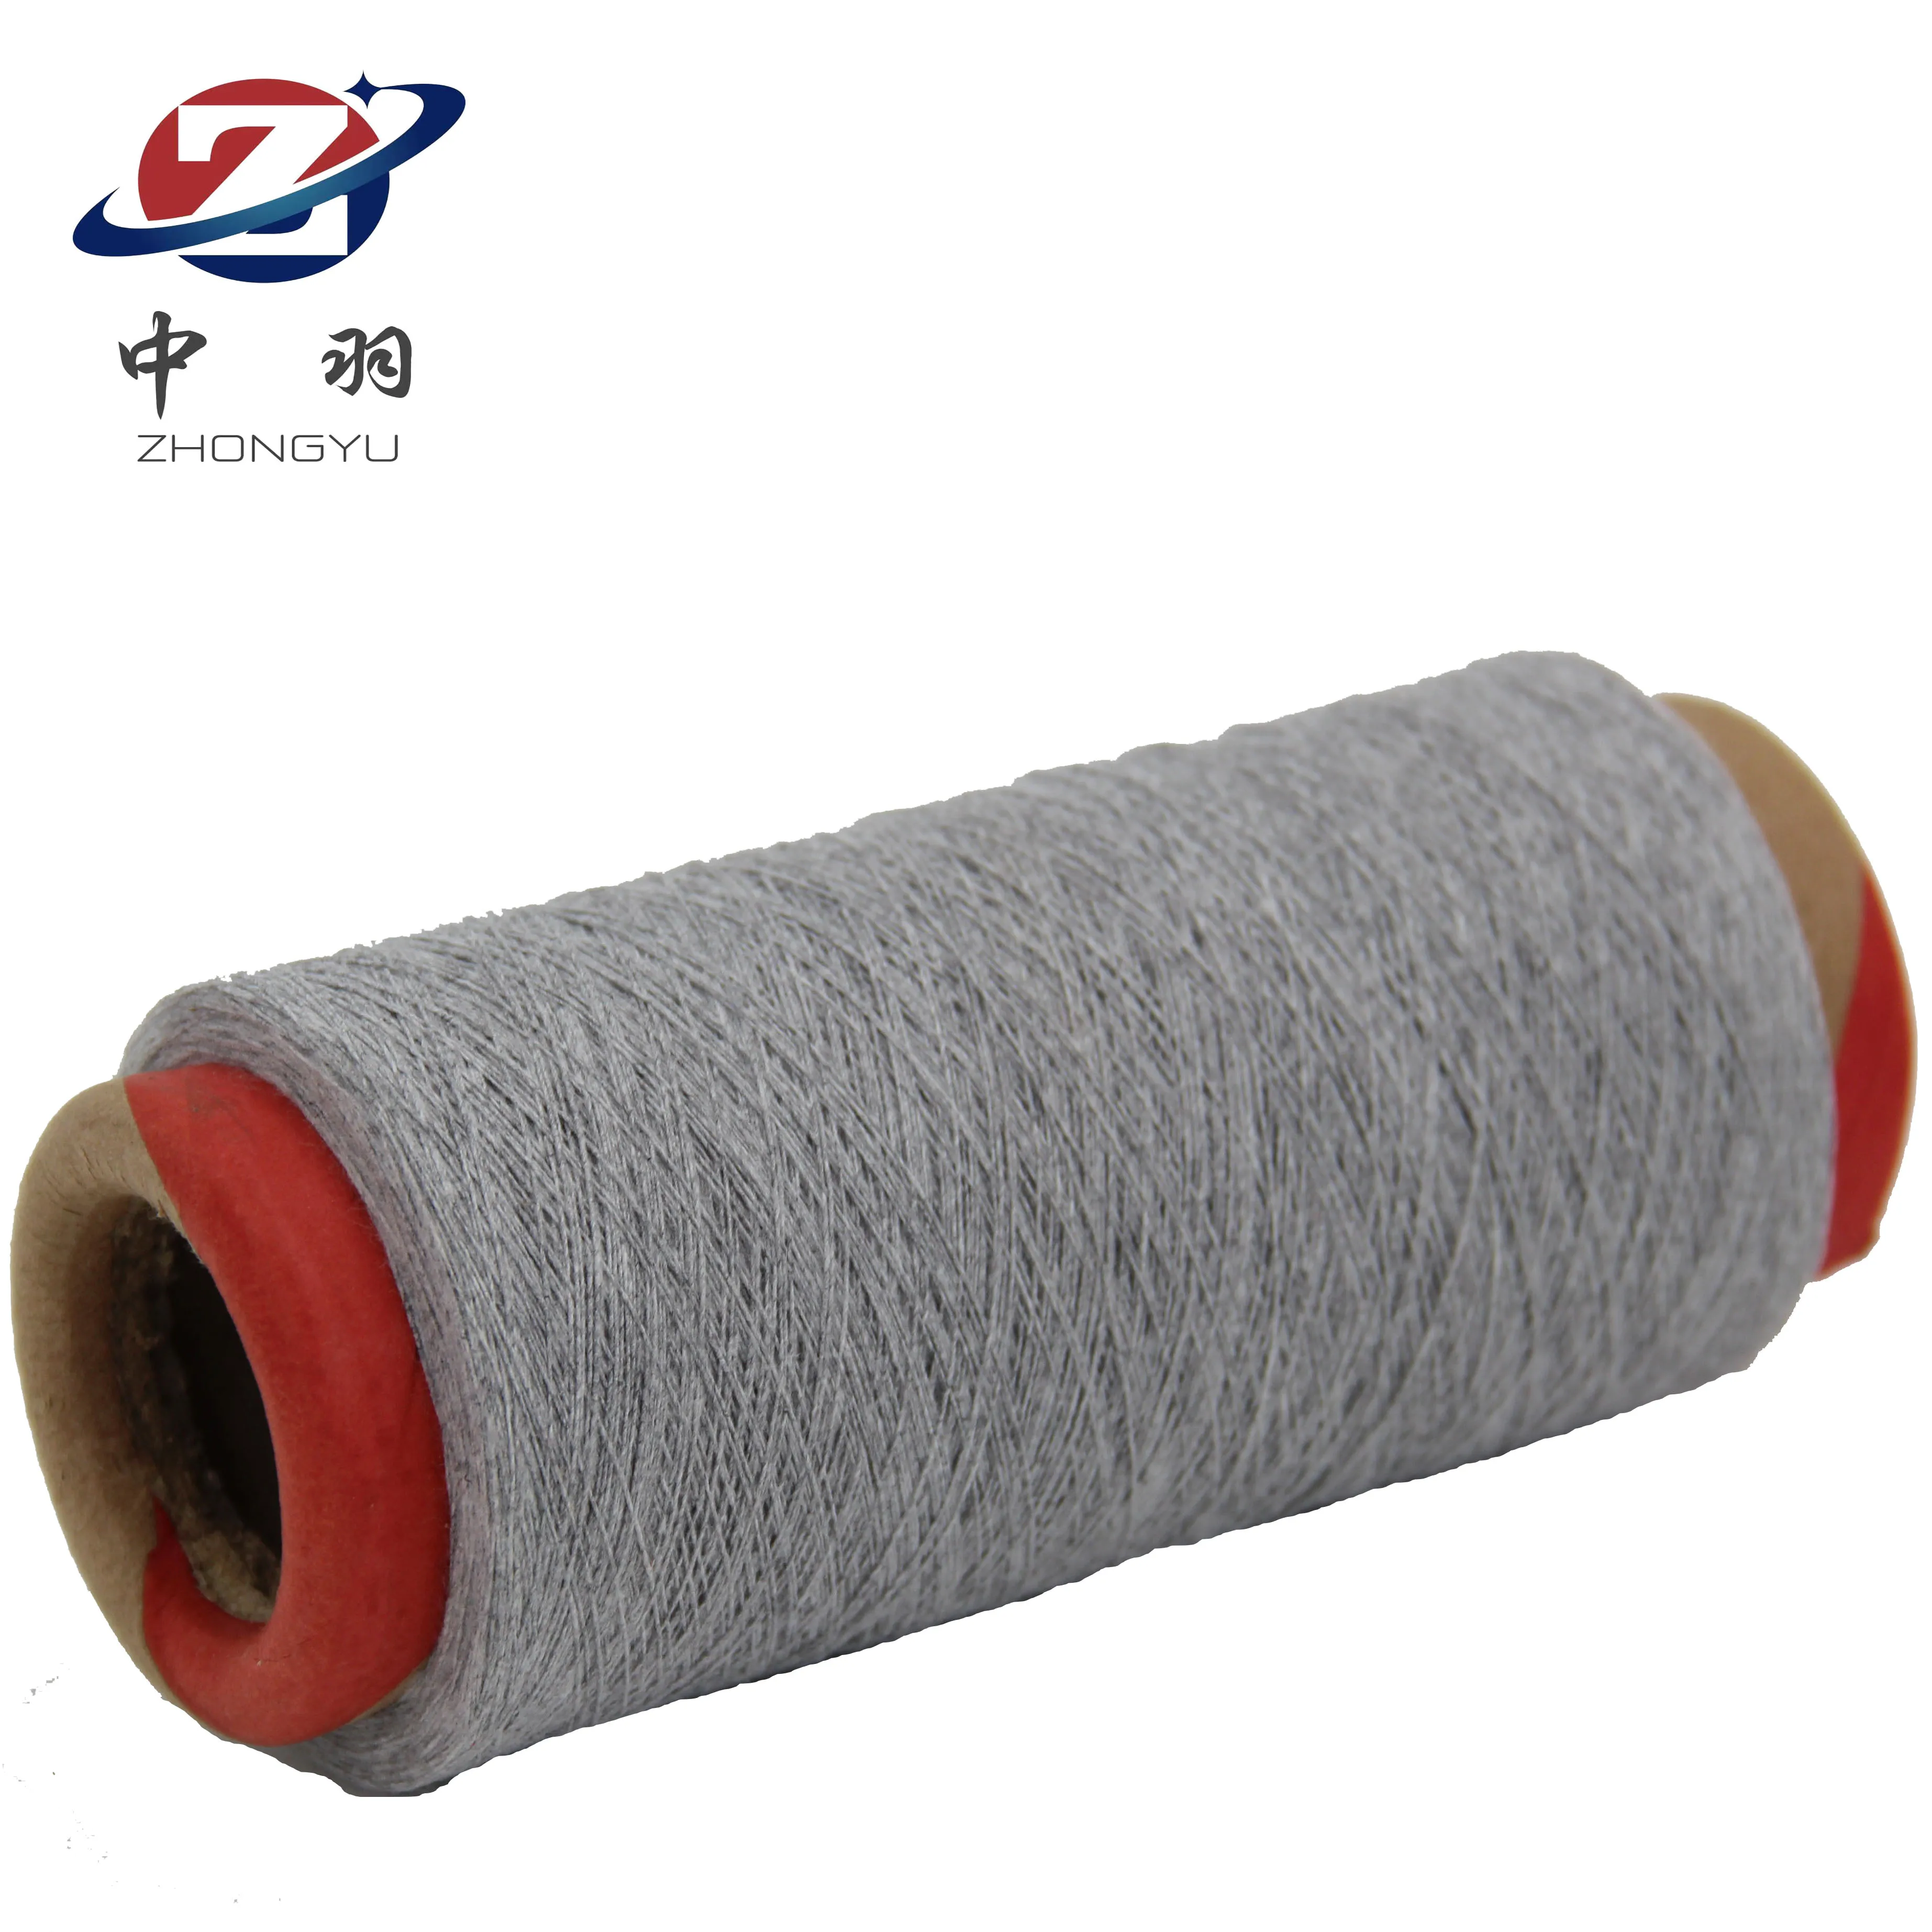 Manufacturer Wholesale Cheap Price Polyester Cotton Recycled Yarn for knitting